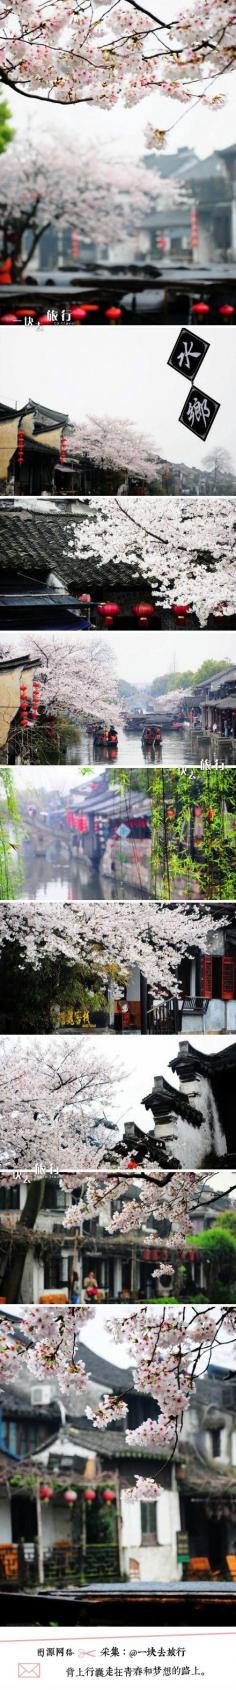 Cherry blossoms in  Xi Tang, Jia Xing, China 嘉兴西塘